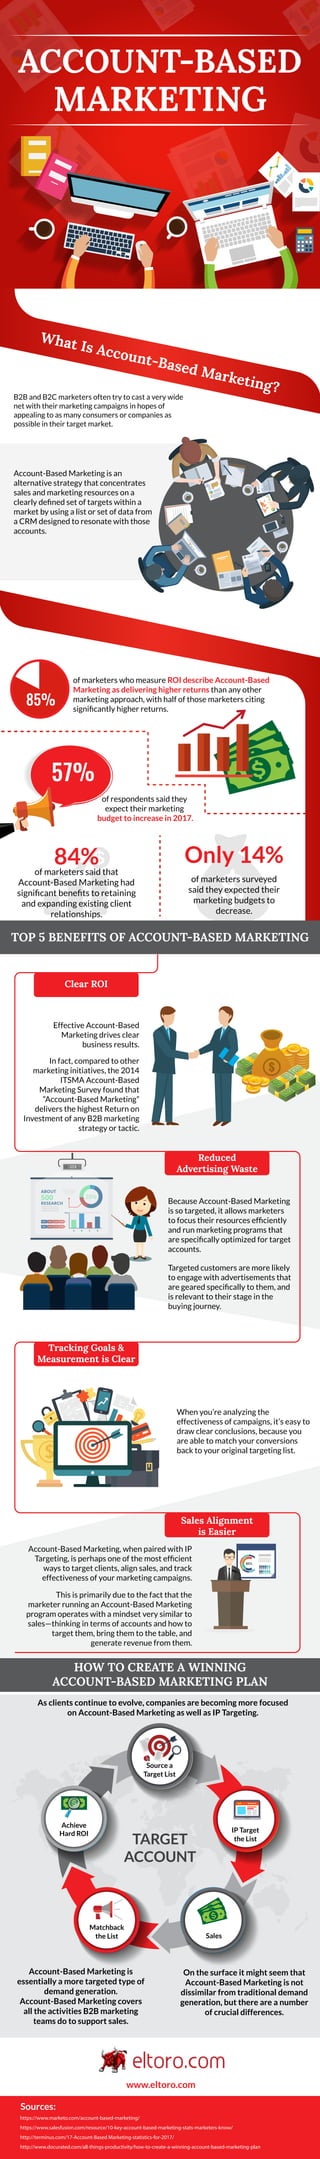 ACCOUNT-BASED
MARKETING
What Is Account-Based Marketing?
B2B and B2C marketers often try to cast a very wide
net with their marketing campaigns in hopes of
appealing to as many consumers or companies as
possible in their target market.
Account-Based Marketing is an
alternative strategy that concentrates
sales and marketing resources on a
clearly deﬁned set of targets within a
market by using a list or set of data from
a CRM designed to resonate with those
accounts.
of marketers who measure ROI describe Account-Based
Marketing as delivering higher returns than any other
marketing approach, with half of those marketers citing
signiﬁcantly higher returns.
of respondents said they
expect their marketing
budget to increase in 2017.
Effective Account-Based
Marketing drives clear
business results.
In fact, compared to other
marketing initiatives, the 2014
ITSMA Account-Based
Marketing Survey found that
“Account-Based Marketing”
delivers the highest Return on
Investment of any B2B marketing
strategy or tactic.
Because Account-Based Marketing
is so targeted, it allows marketers
to focus their resources efﬁciently
and run marketing programs that
are speciﬁcally optimized for target
accounts.
Targeted customers are more likely
to engage with advertisements that
are geared speciﬁcally to them, and
is relevant to their stage in the
buying journey.
When you’re analyzing the
effectiveness of campaigns, it’s easy to
draw clear conclusions, because you
are able to match your conversions
back to your original targeting list.
Account-Based Marketing, when paired with IP
Targeting, is perhaps one of the most efﬁcient
ways to target clients, align sales, and track
effectiveness of your marketing campaigns.
This is primarily due to the fact that the
marketer running an Account-Based Marketing
program operates with a mindset very similar to
sales—thinking in terms of accounts and how to
target them, bring them to the table, and
generate revenue from them.
85%
85%57%
of marketers surveyed
said they expected their
marketing budgets to
decrease.
Only 14%
of marketers said that
Account-Based Marketing had
signiﬁcant beneﬁts to retaining
and expanding existing client
relationships.
84%
TOP 5 BENEFITS OF ACCOUNT-BASED MARKETING
HOW TO CREATE A WINNING
ACCOUNT-BASED MARKETING PLAN
Clear ROI
Reduced
Advertising Waste
Tracking Goals &
Measurement is Clear
Sales Alignment
is Easier
LOREM IPSUM DOLOR
LOREM IPSUM DOLOR
LOREM IPSUM DOLOR
500
RESEARCH
ABOUT
Lorem ipsum dolor sit
amet, consectetuer
adipiscing elit.
28%
100%
A B C D
100% 50% 25% 75%
100% 50% 25% 75%
$
Source a
Target List
IP Target
the List
Sales
Matchback
the List
Achieve
Hard ROI
TARGET
ACCOUNT
As clients continue to evolve, companies are becoming more focused
on Account-Based Marketing as well as IP Targeting.
Account-Based Marketing is
essentially a more targeted type of
demand generation.
Account-Based Marketing covers
all the activities B2B marketing
teams do to support sales.
On the surface it might seem that
Account-Based Marketing is not
dissimilar from traditional demand
generation, but there are a number
of crucial differences.
www.eltoro.com
Sources:
https://www.marketo.com/account-based-marketing/
https://www.salesfusion.com/resource/10-key-account-based-marketing-stats-marketers-know/
http://terminus.com/17-Account-Based Marketing-statistics-for-2017/
http://www.docurated.com/all-things-productivity/how-to-create-a-winning-account-based-marketing-plan
 